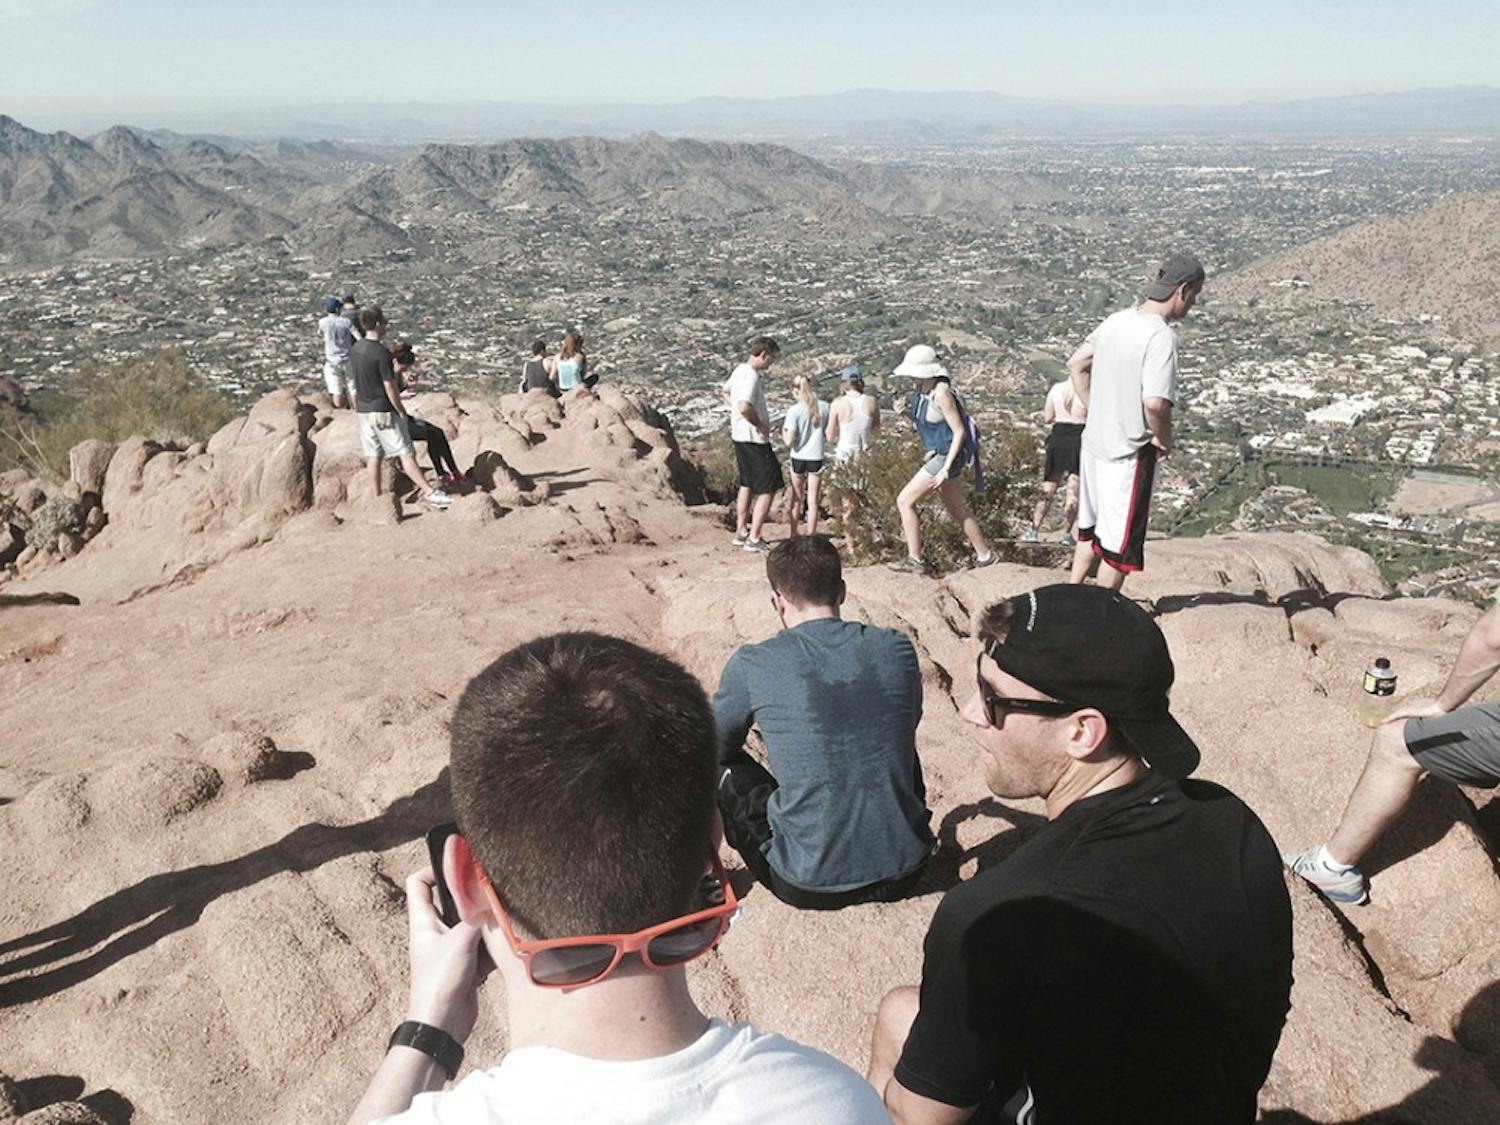 You can almost always count on having company on top of Camelback Mountain near the border of Phoenix and Scottsdale, Ariz. (Craig Hill/Tacoma News Tribune/TNS)